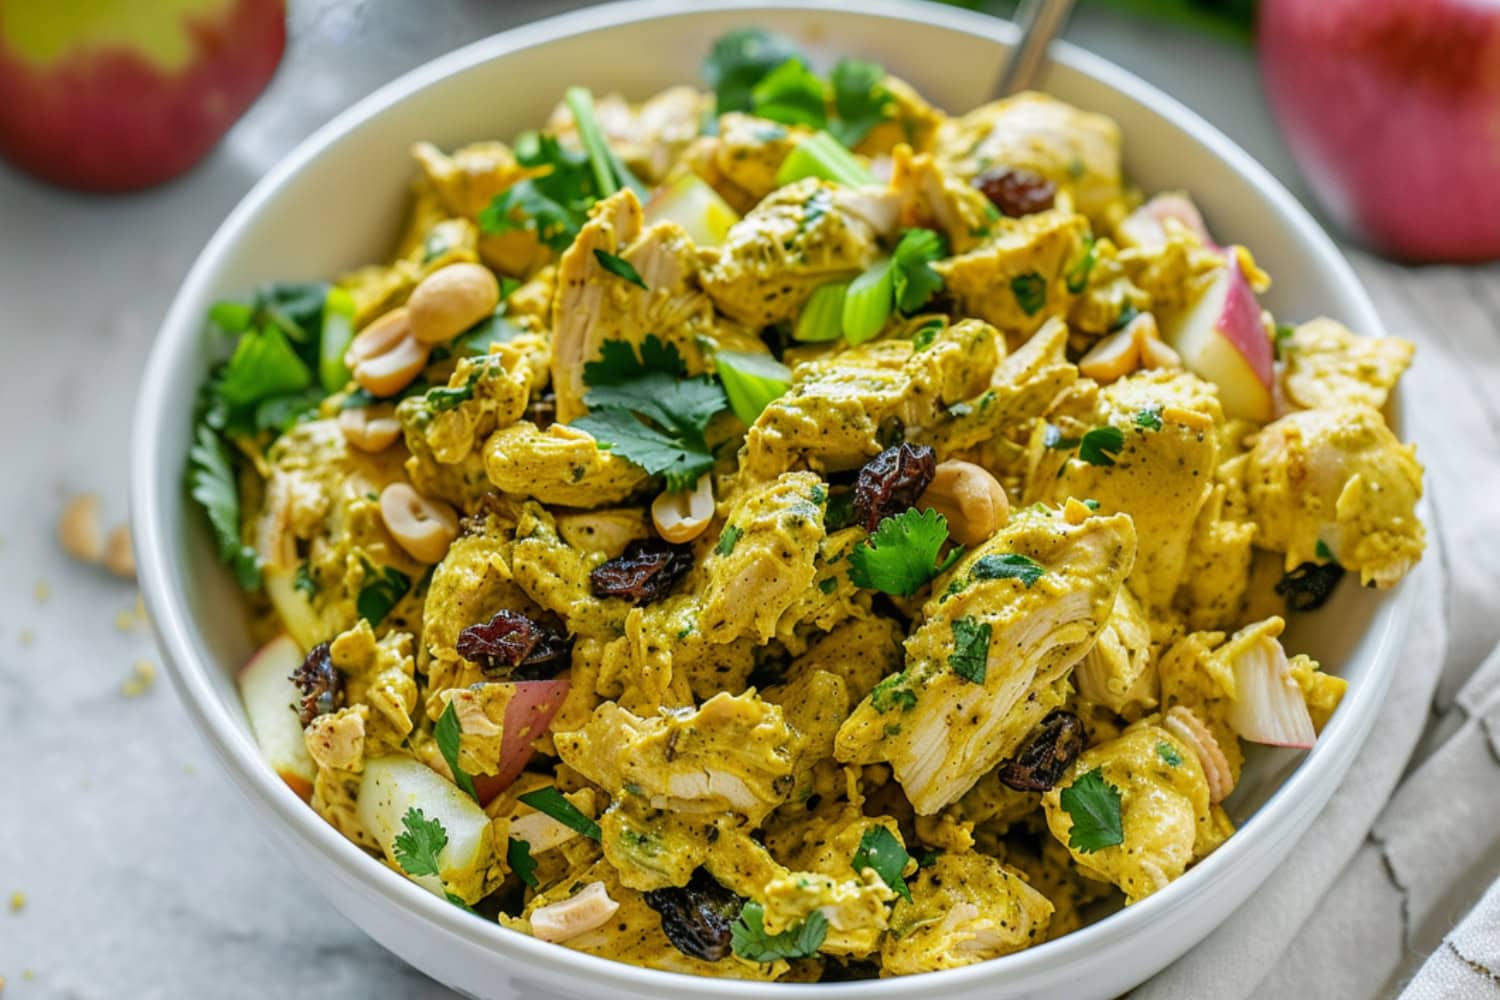 Chicken curry salad with curry spices, sweet raisins and apples, crunchy cashews, and fresh cilantro served in a white bowl.